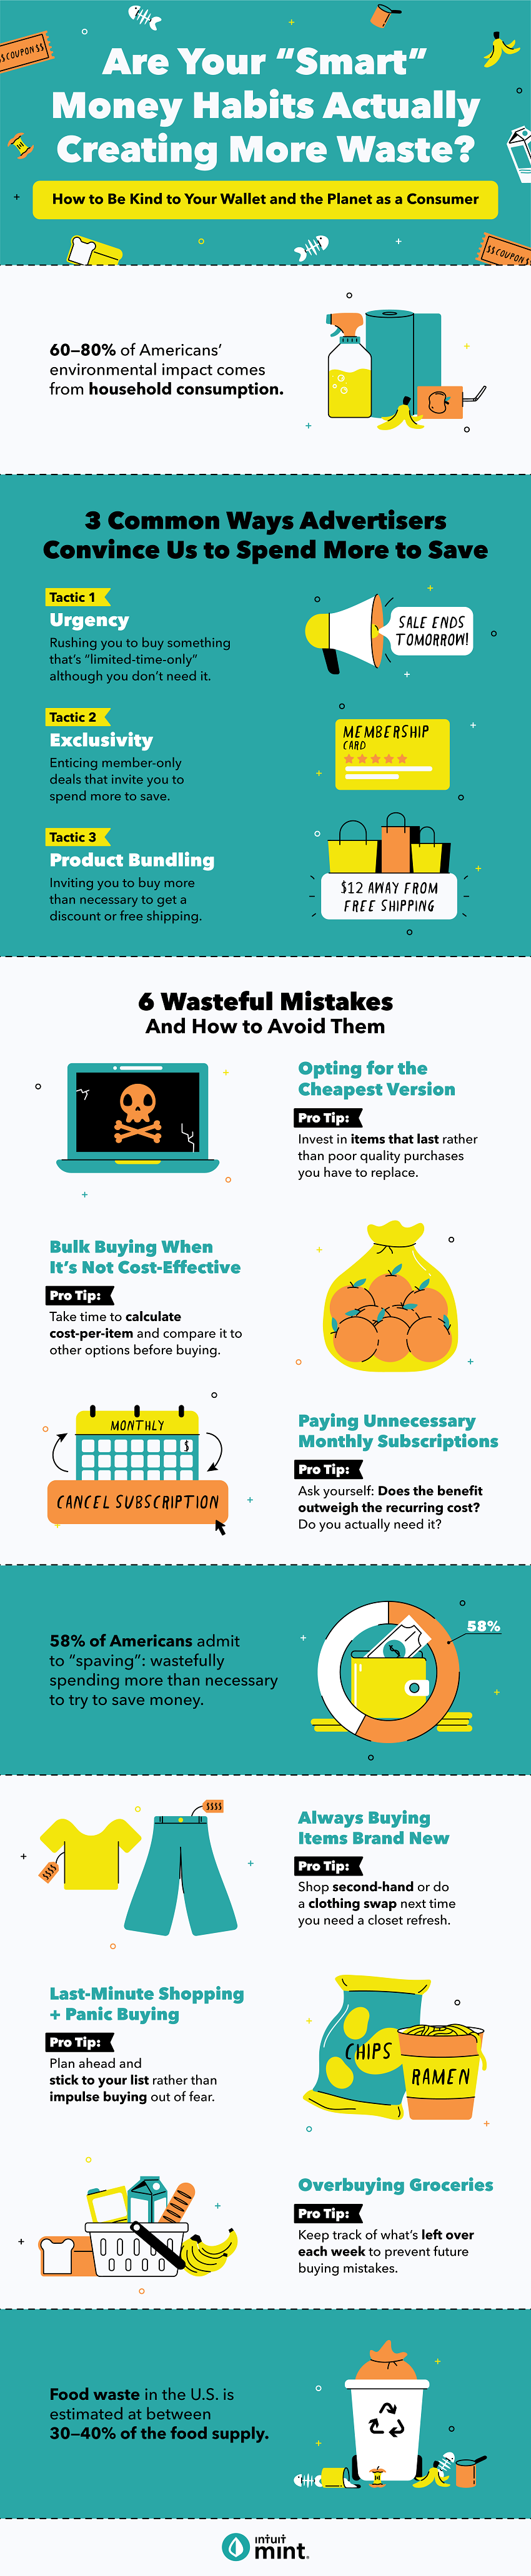 Infographic: Are Your 'Smart' Money Habits Creating More Waste?